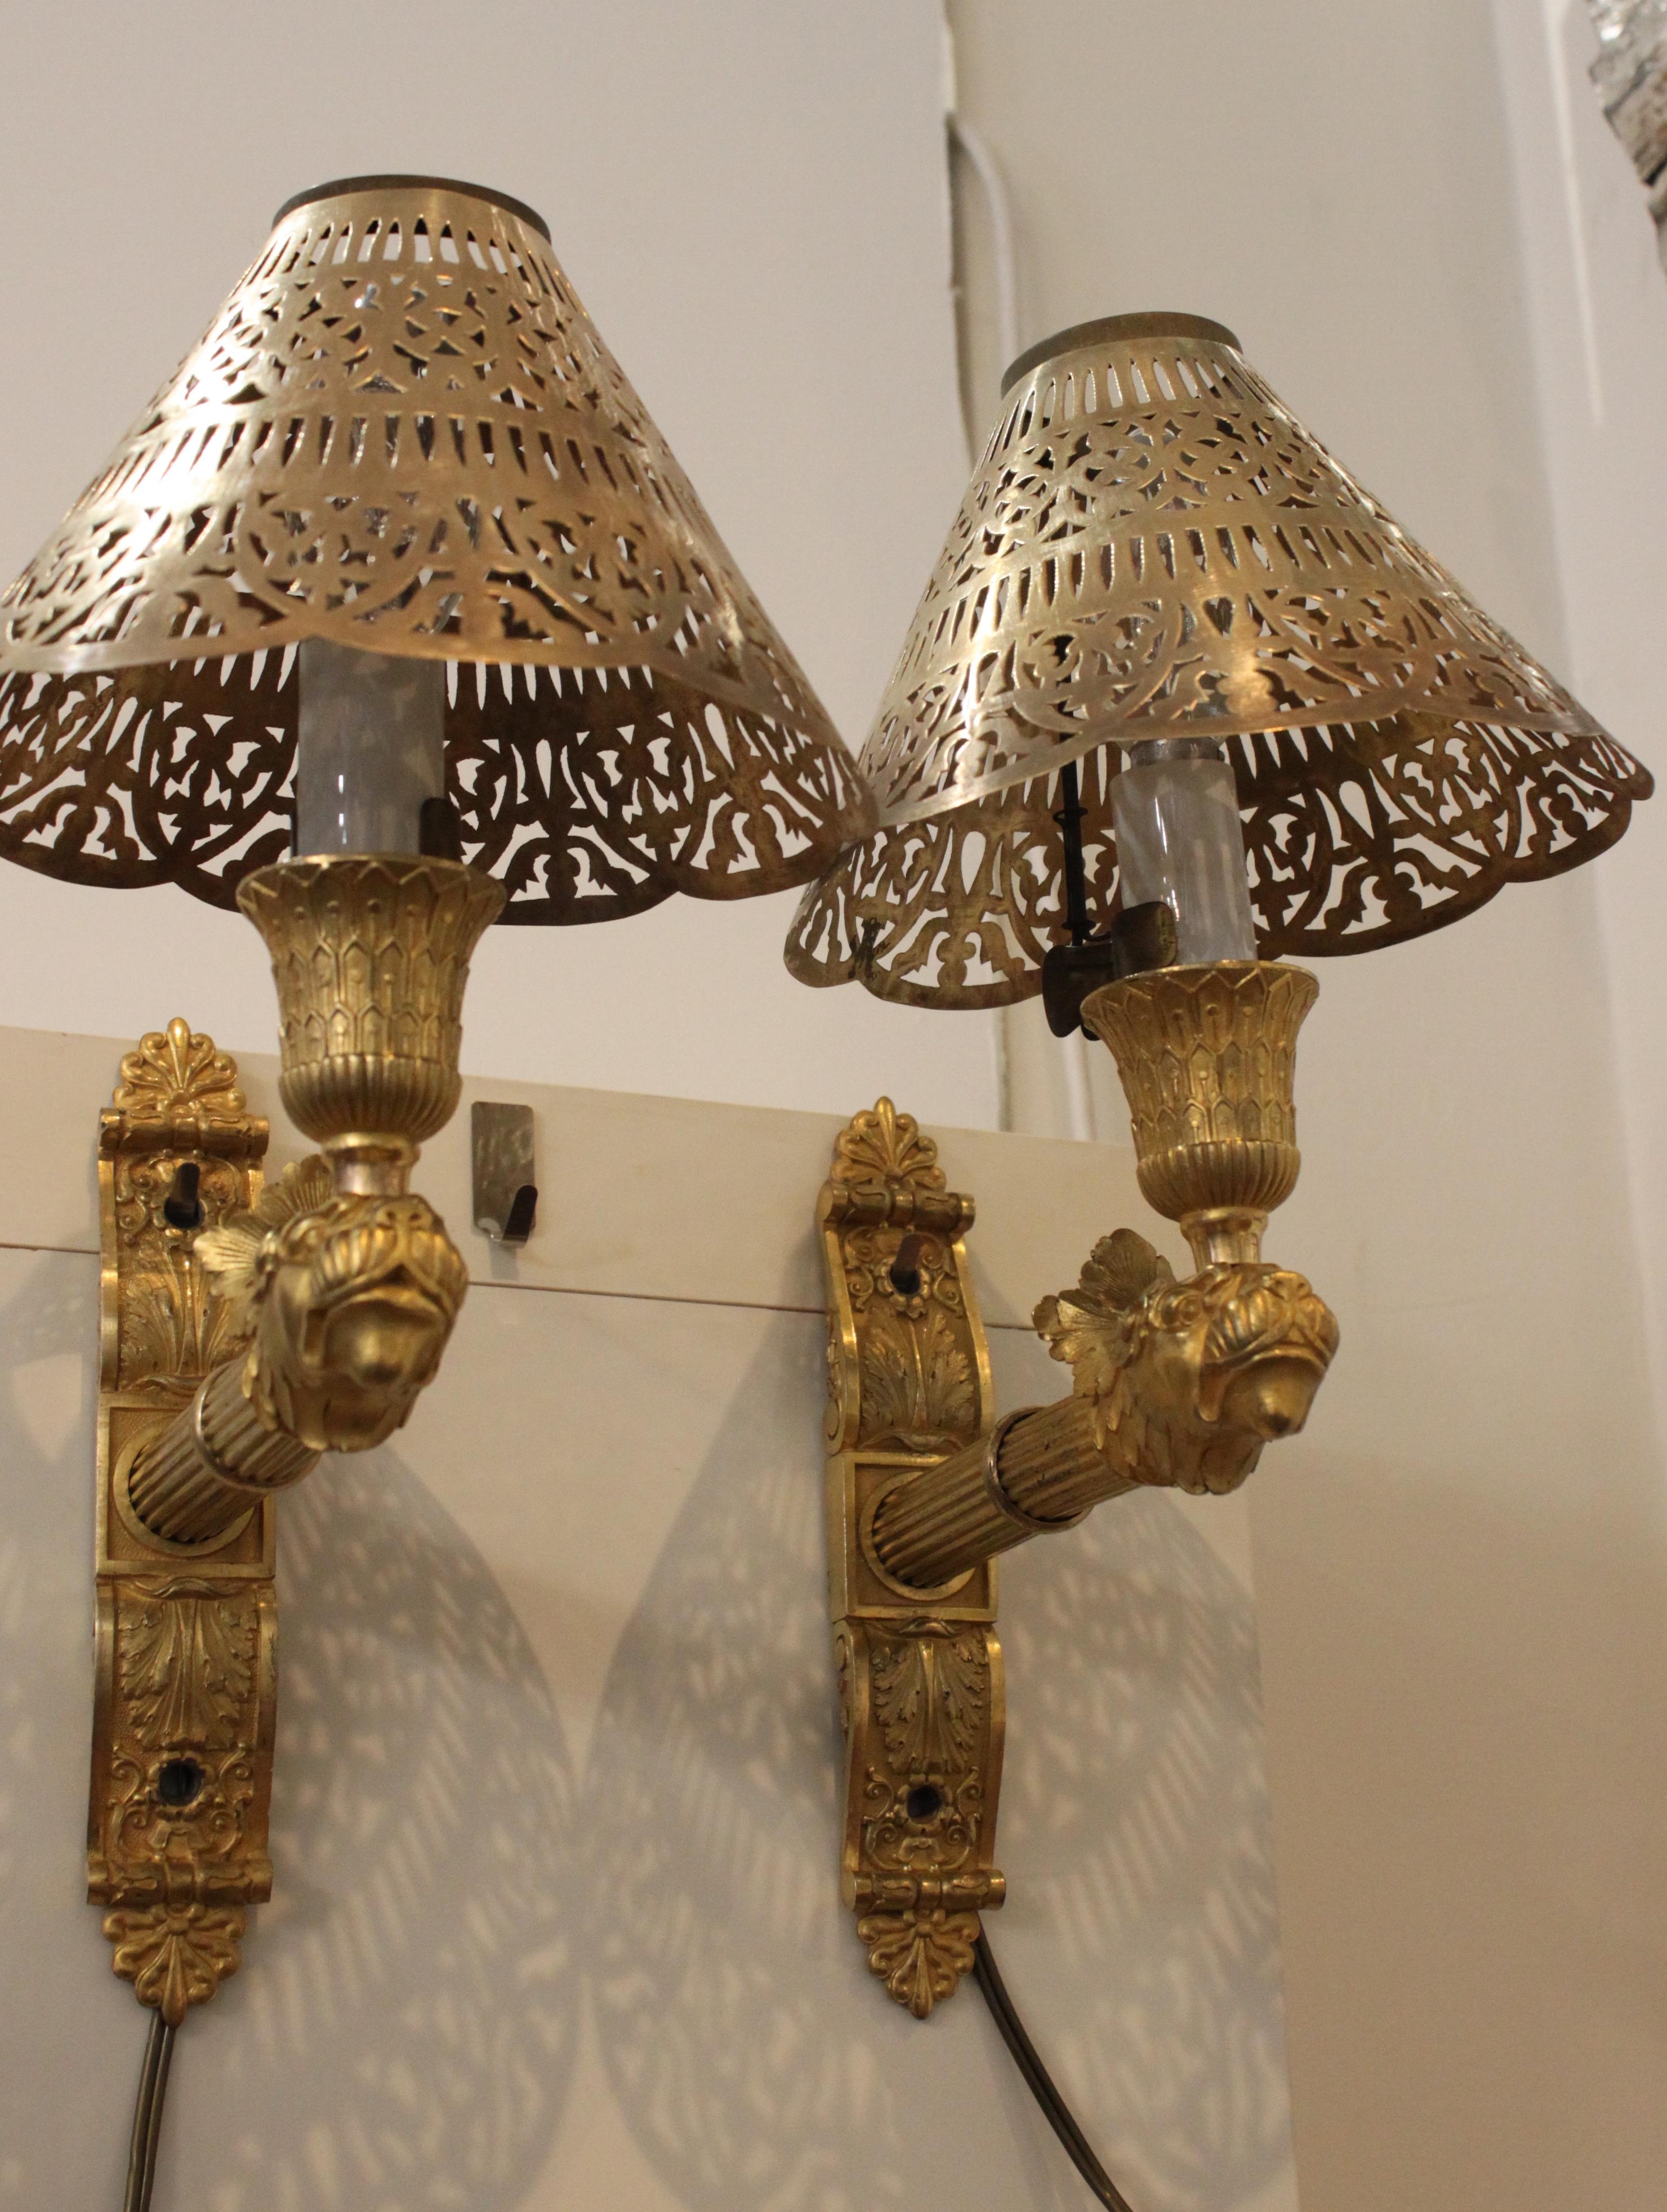 Pair of Restauration or Charles X Wall lamps, in mercury gilded bronze with a lion head neoclassical decoration. They were electrified.
Good condition.
Dimensions: total height 32 cm, width without lampshade 4 cm, depth 19.5 cm.
Diameter of the